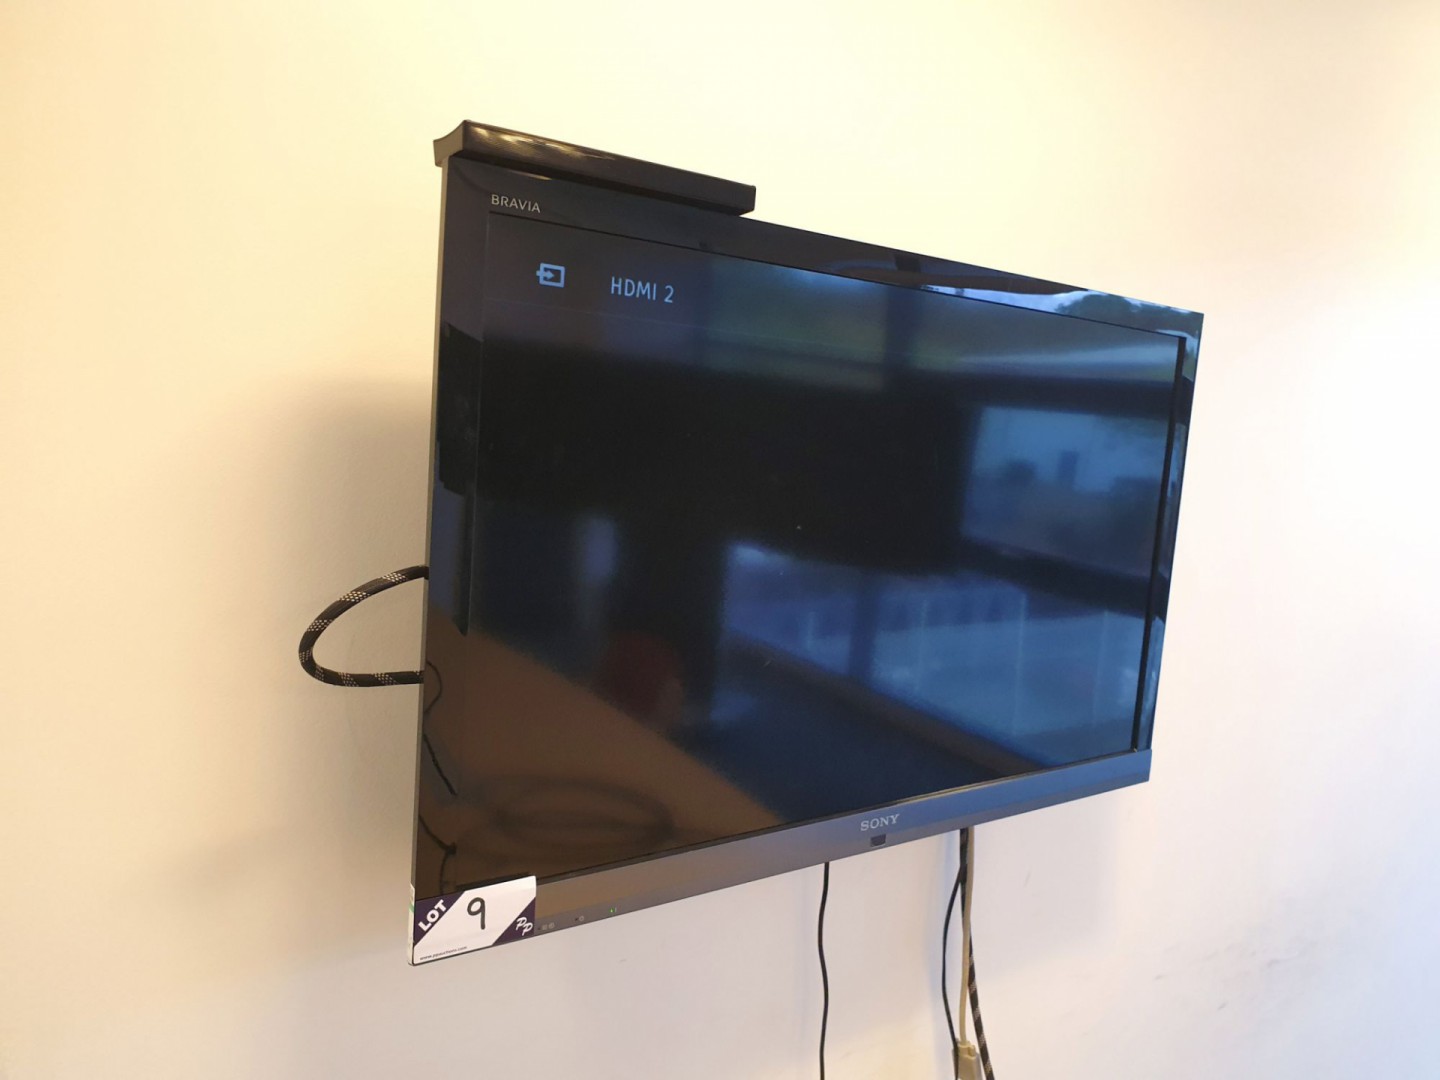 Sony Bravia 40" LCD TV on wall bracket with remote